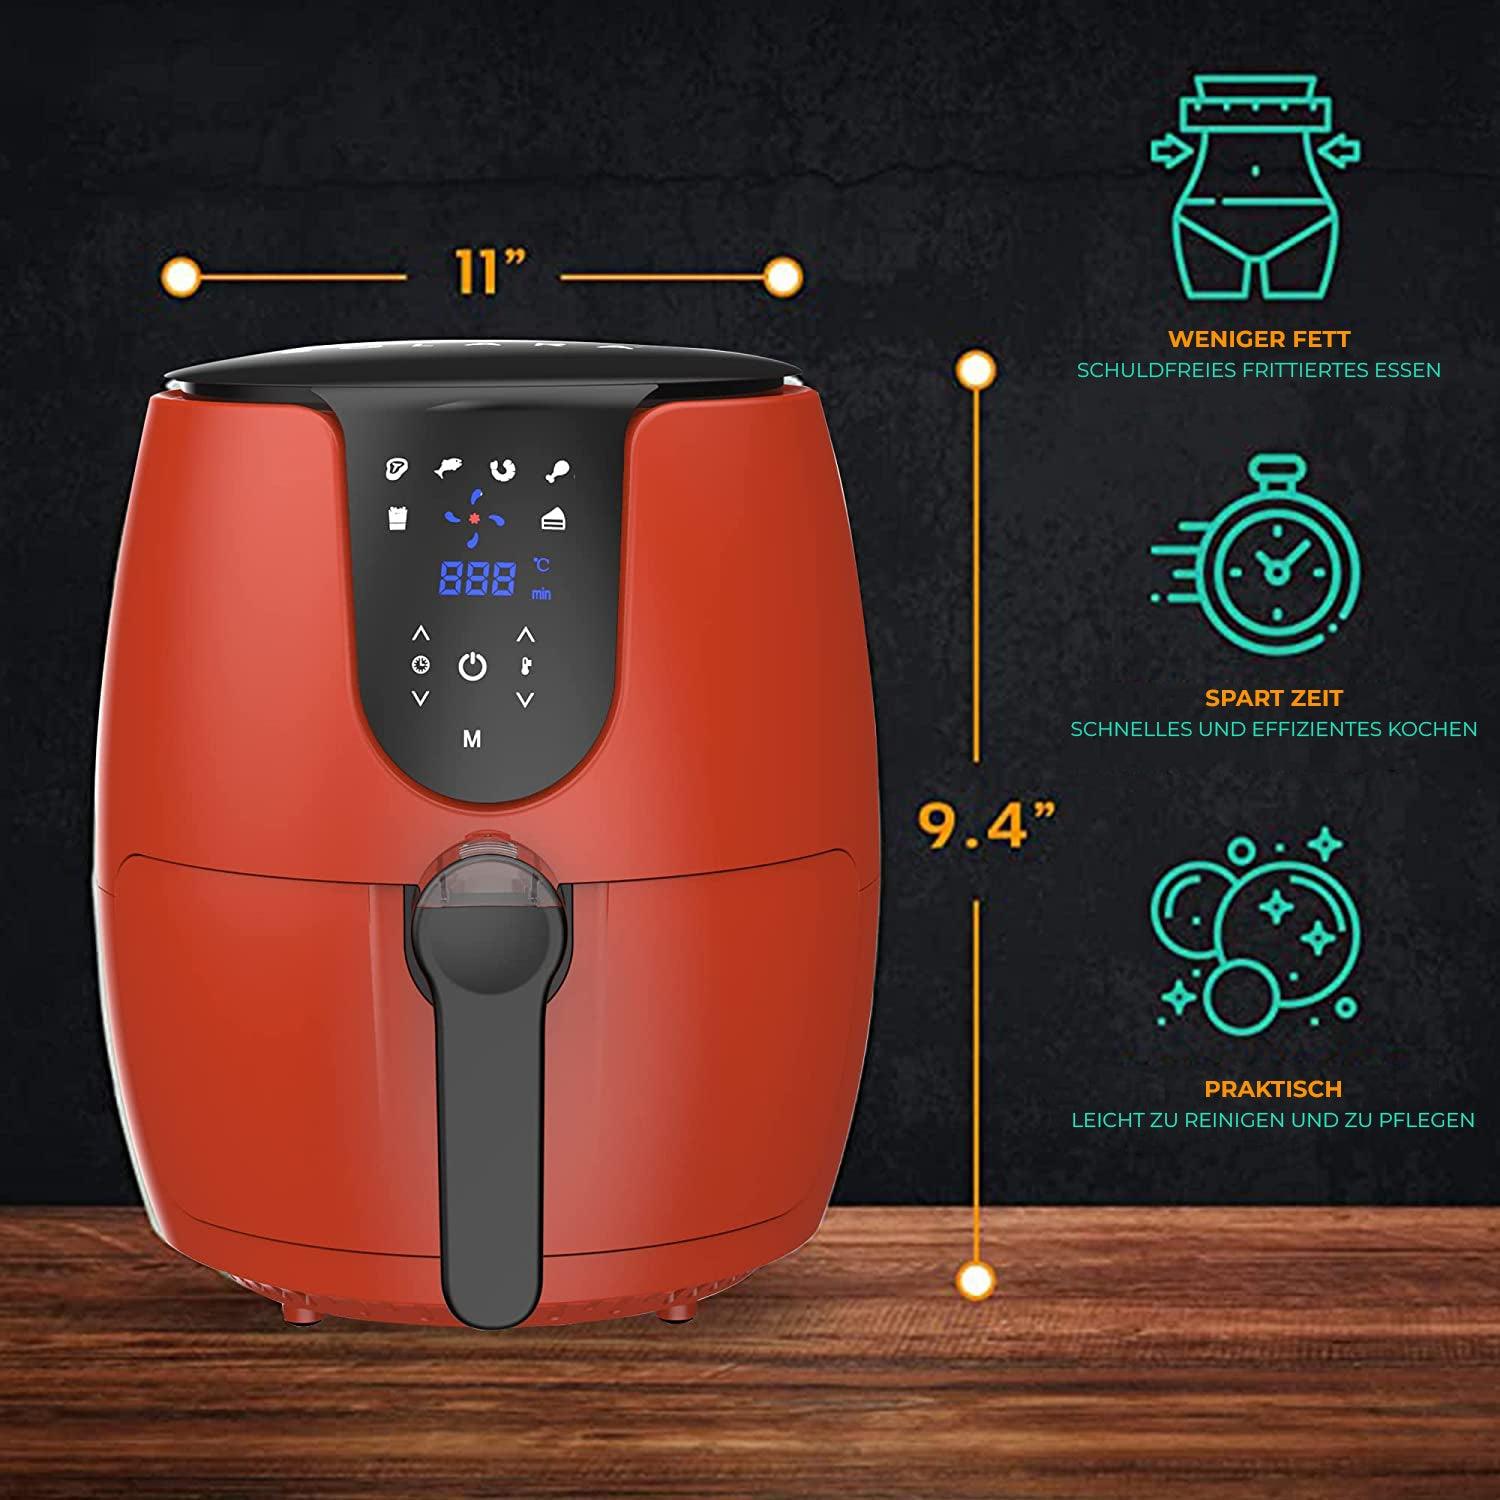 Solara Digital Air Fryer for Home Kitchen with mobile app - Solara Home